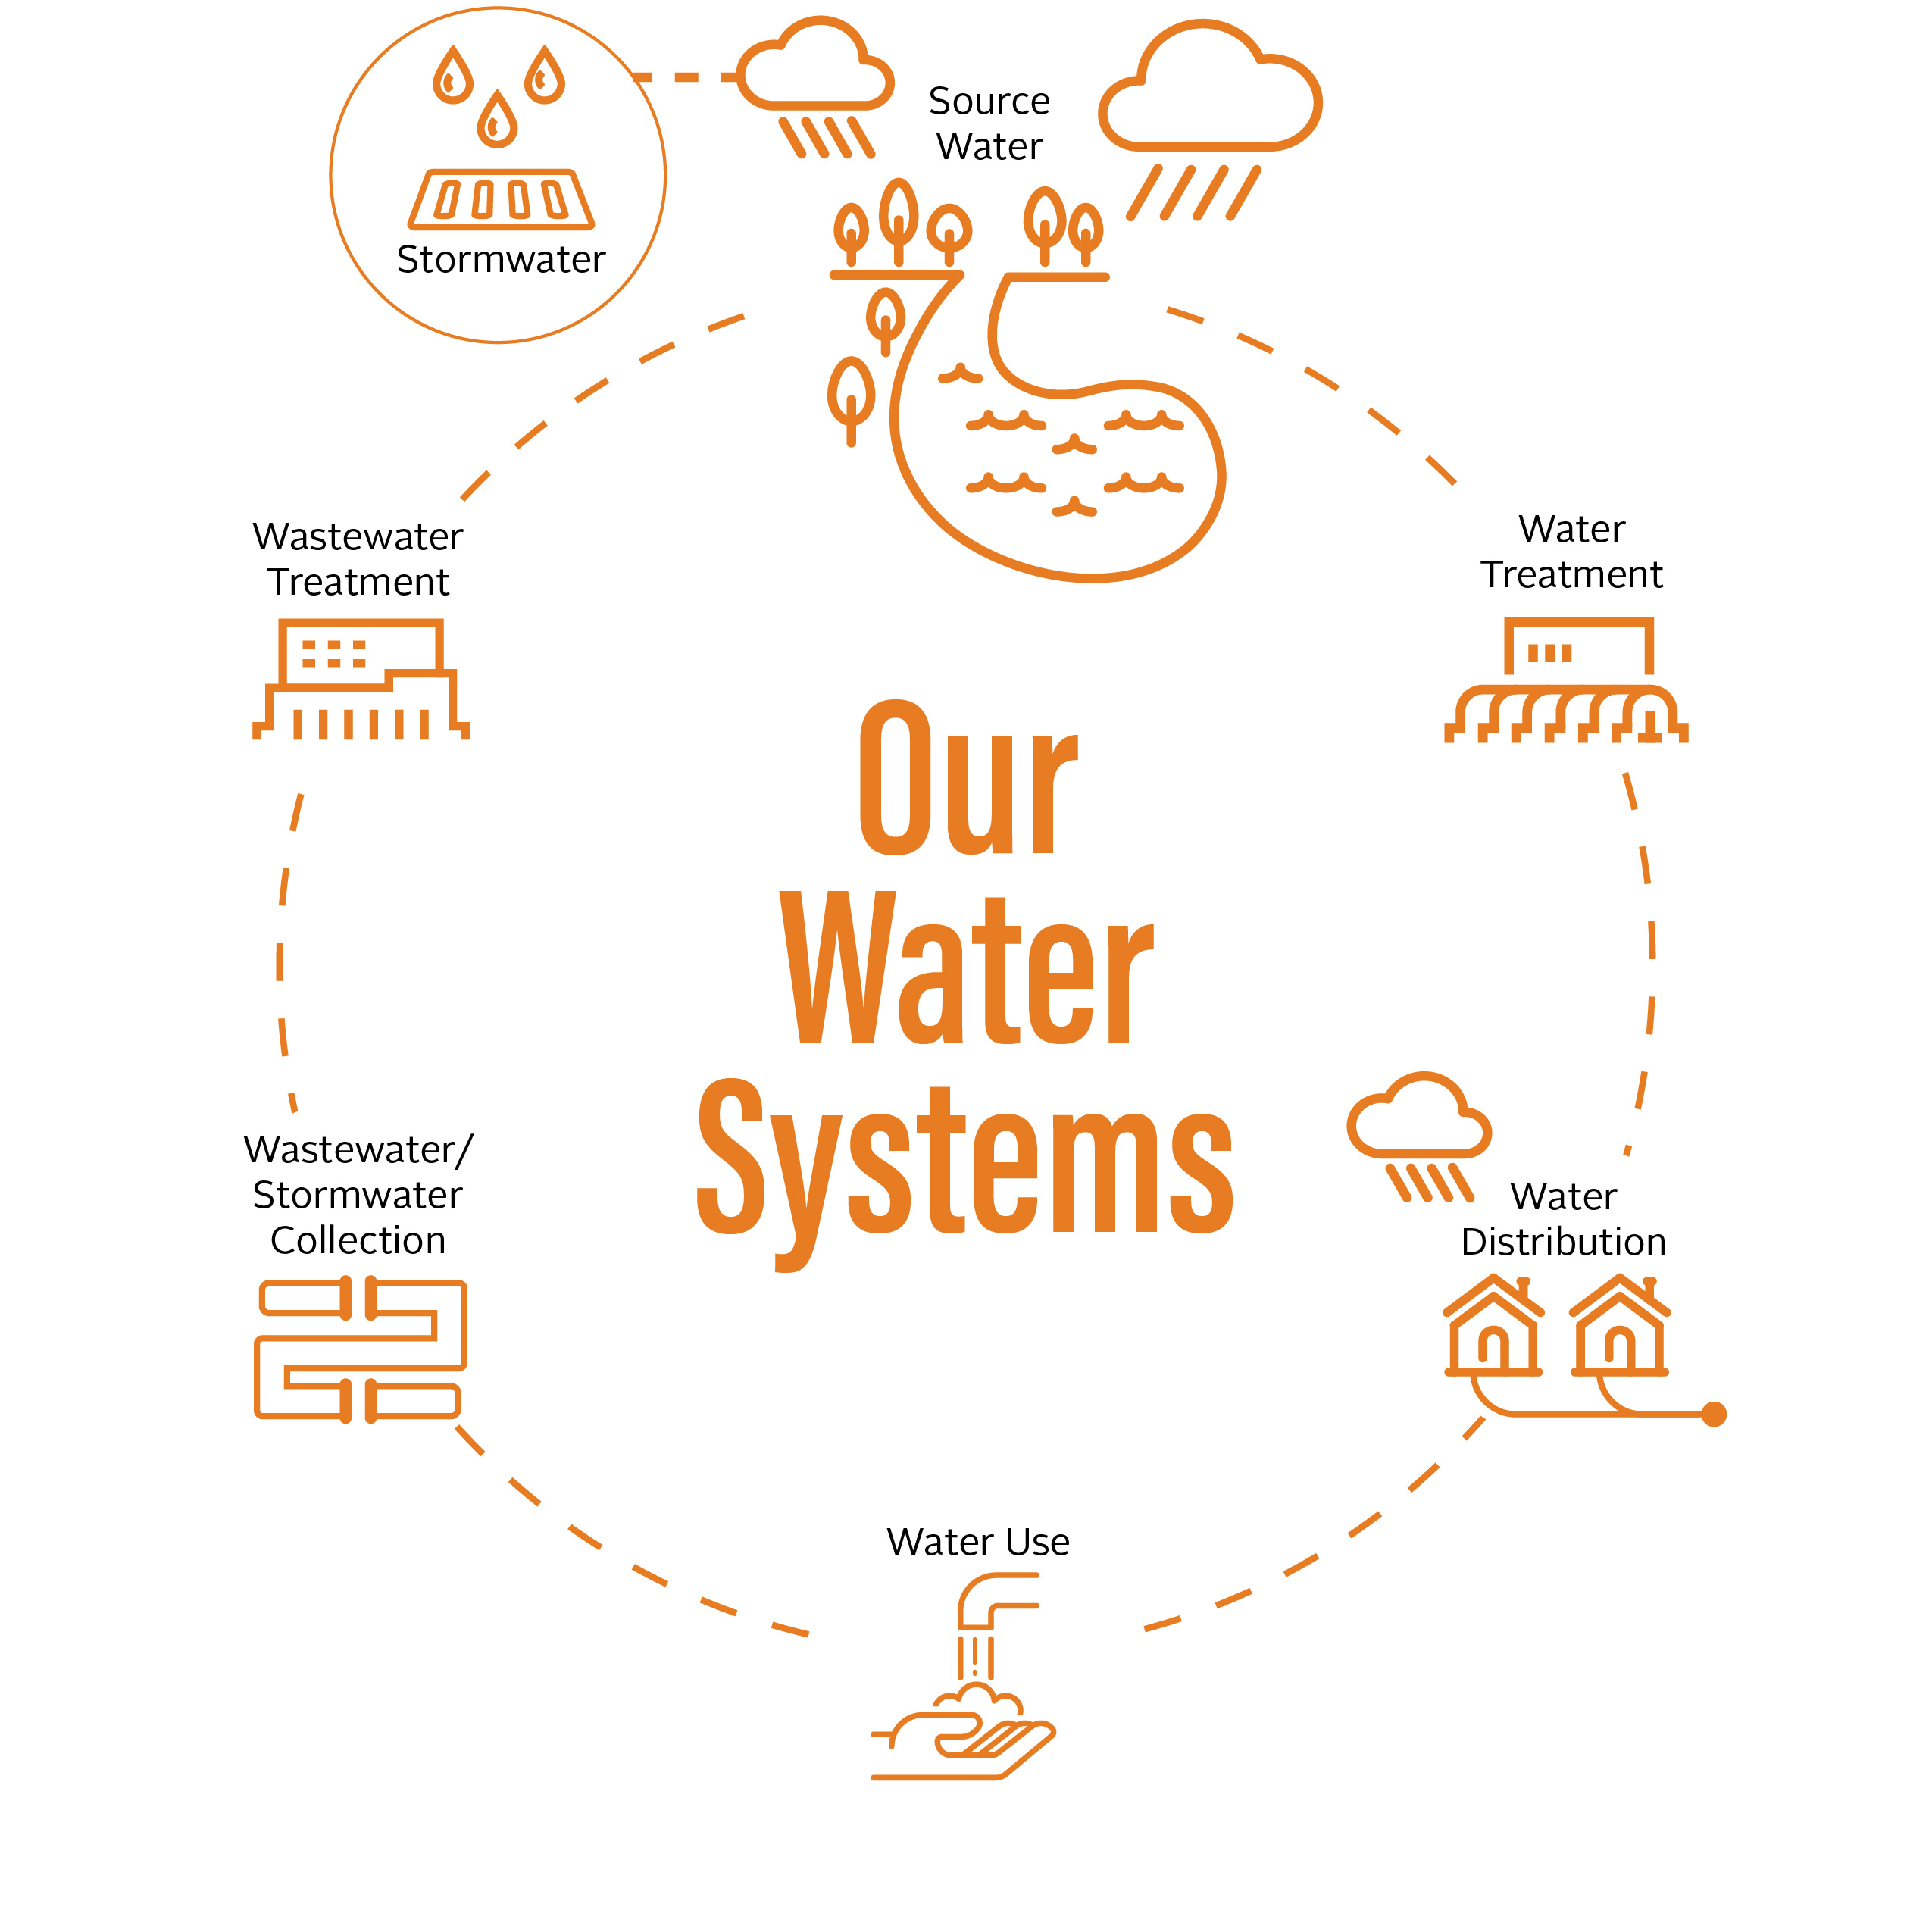 Our Water Systems